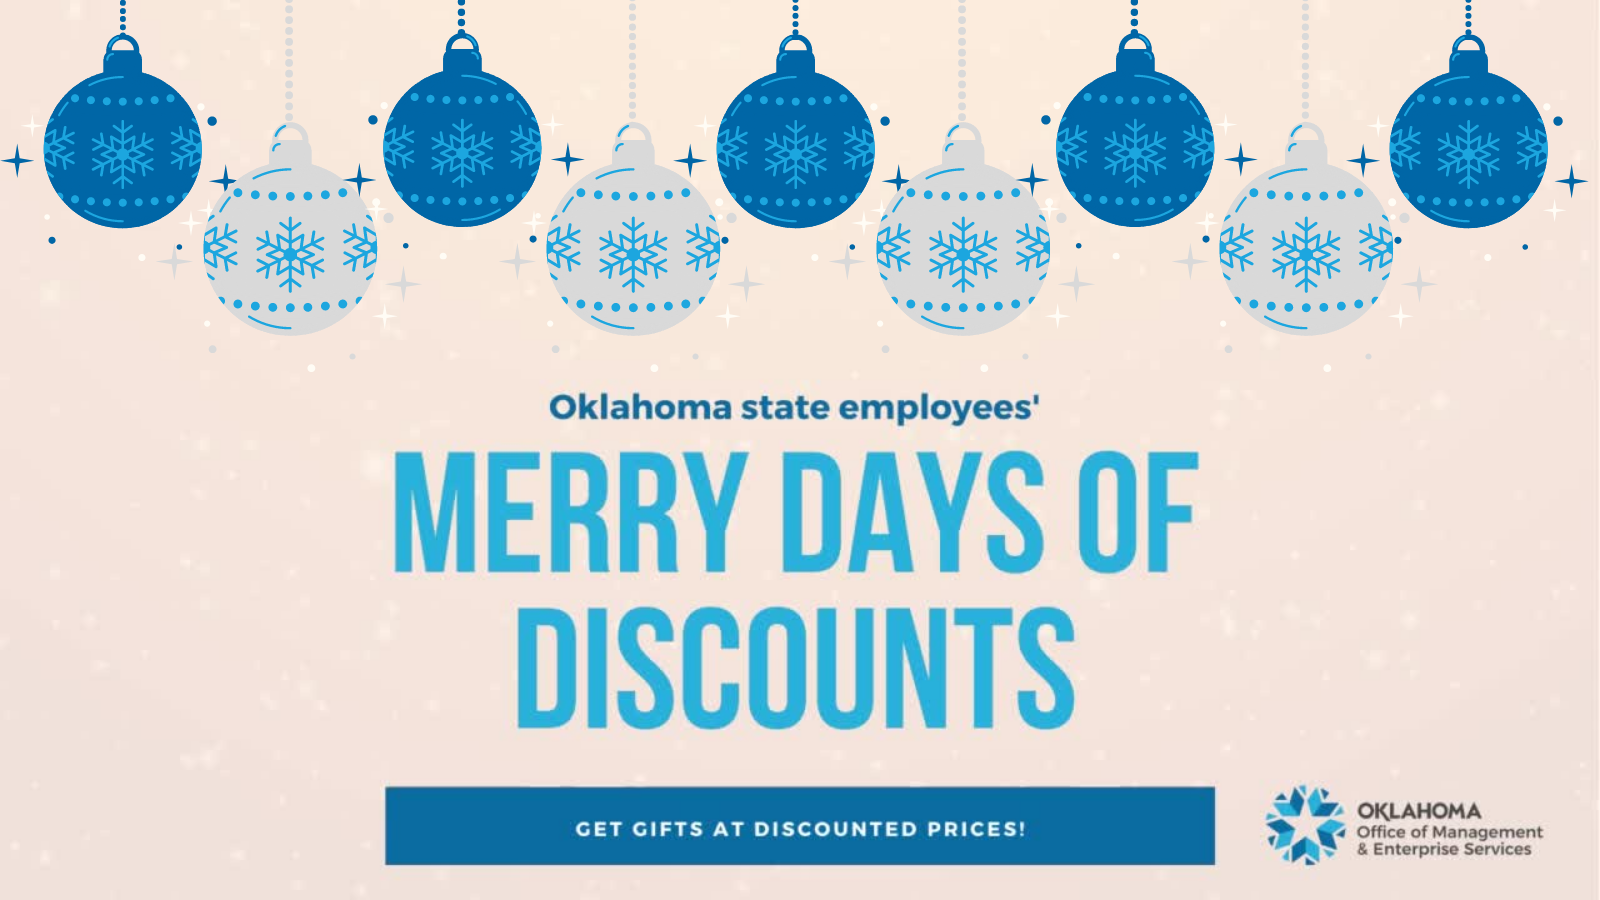 Twitter_Merry Days of Discounts 2 (1)